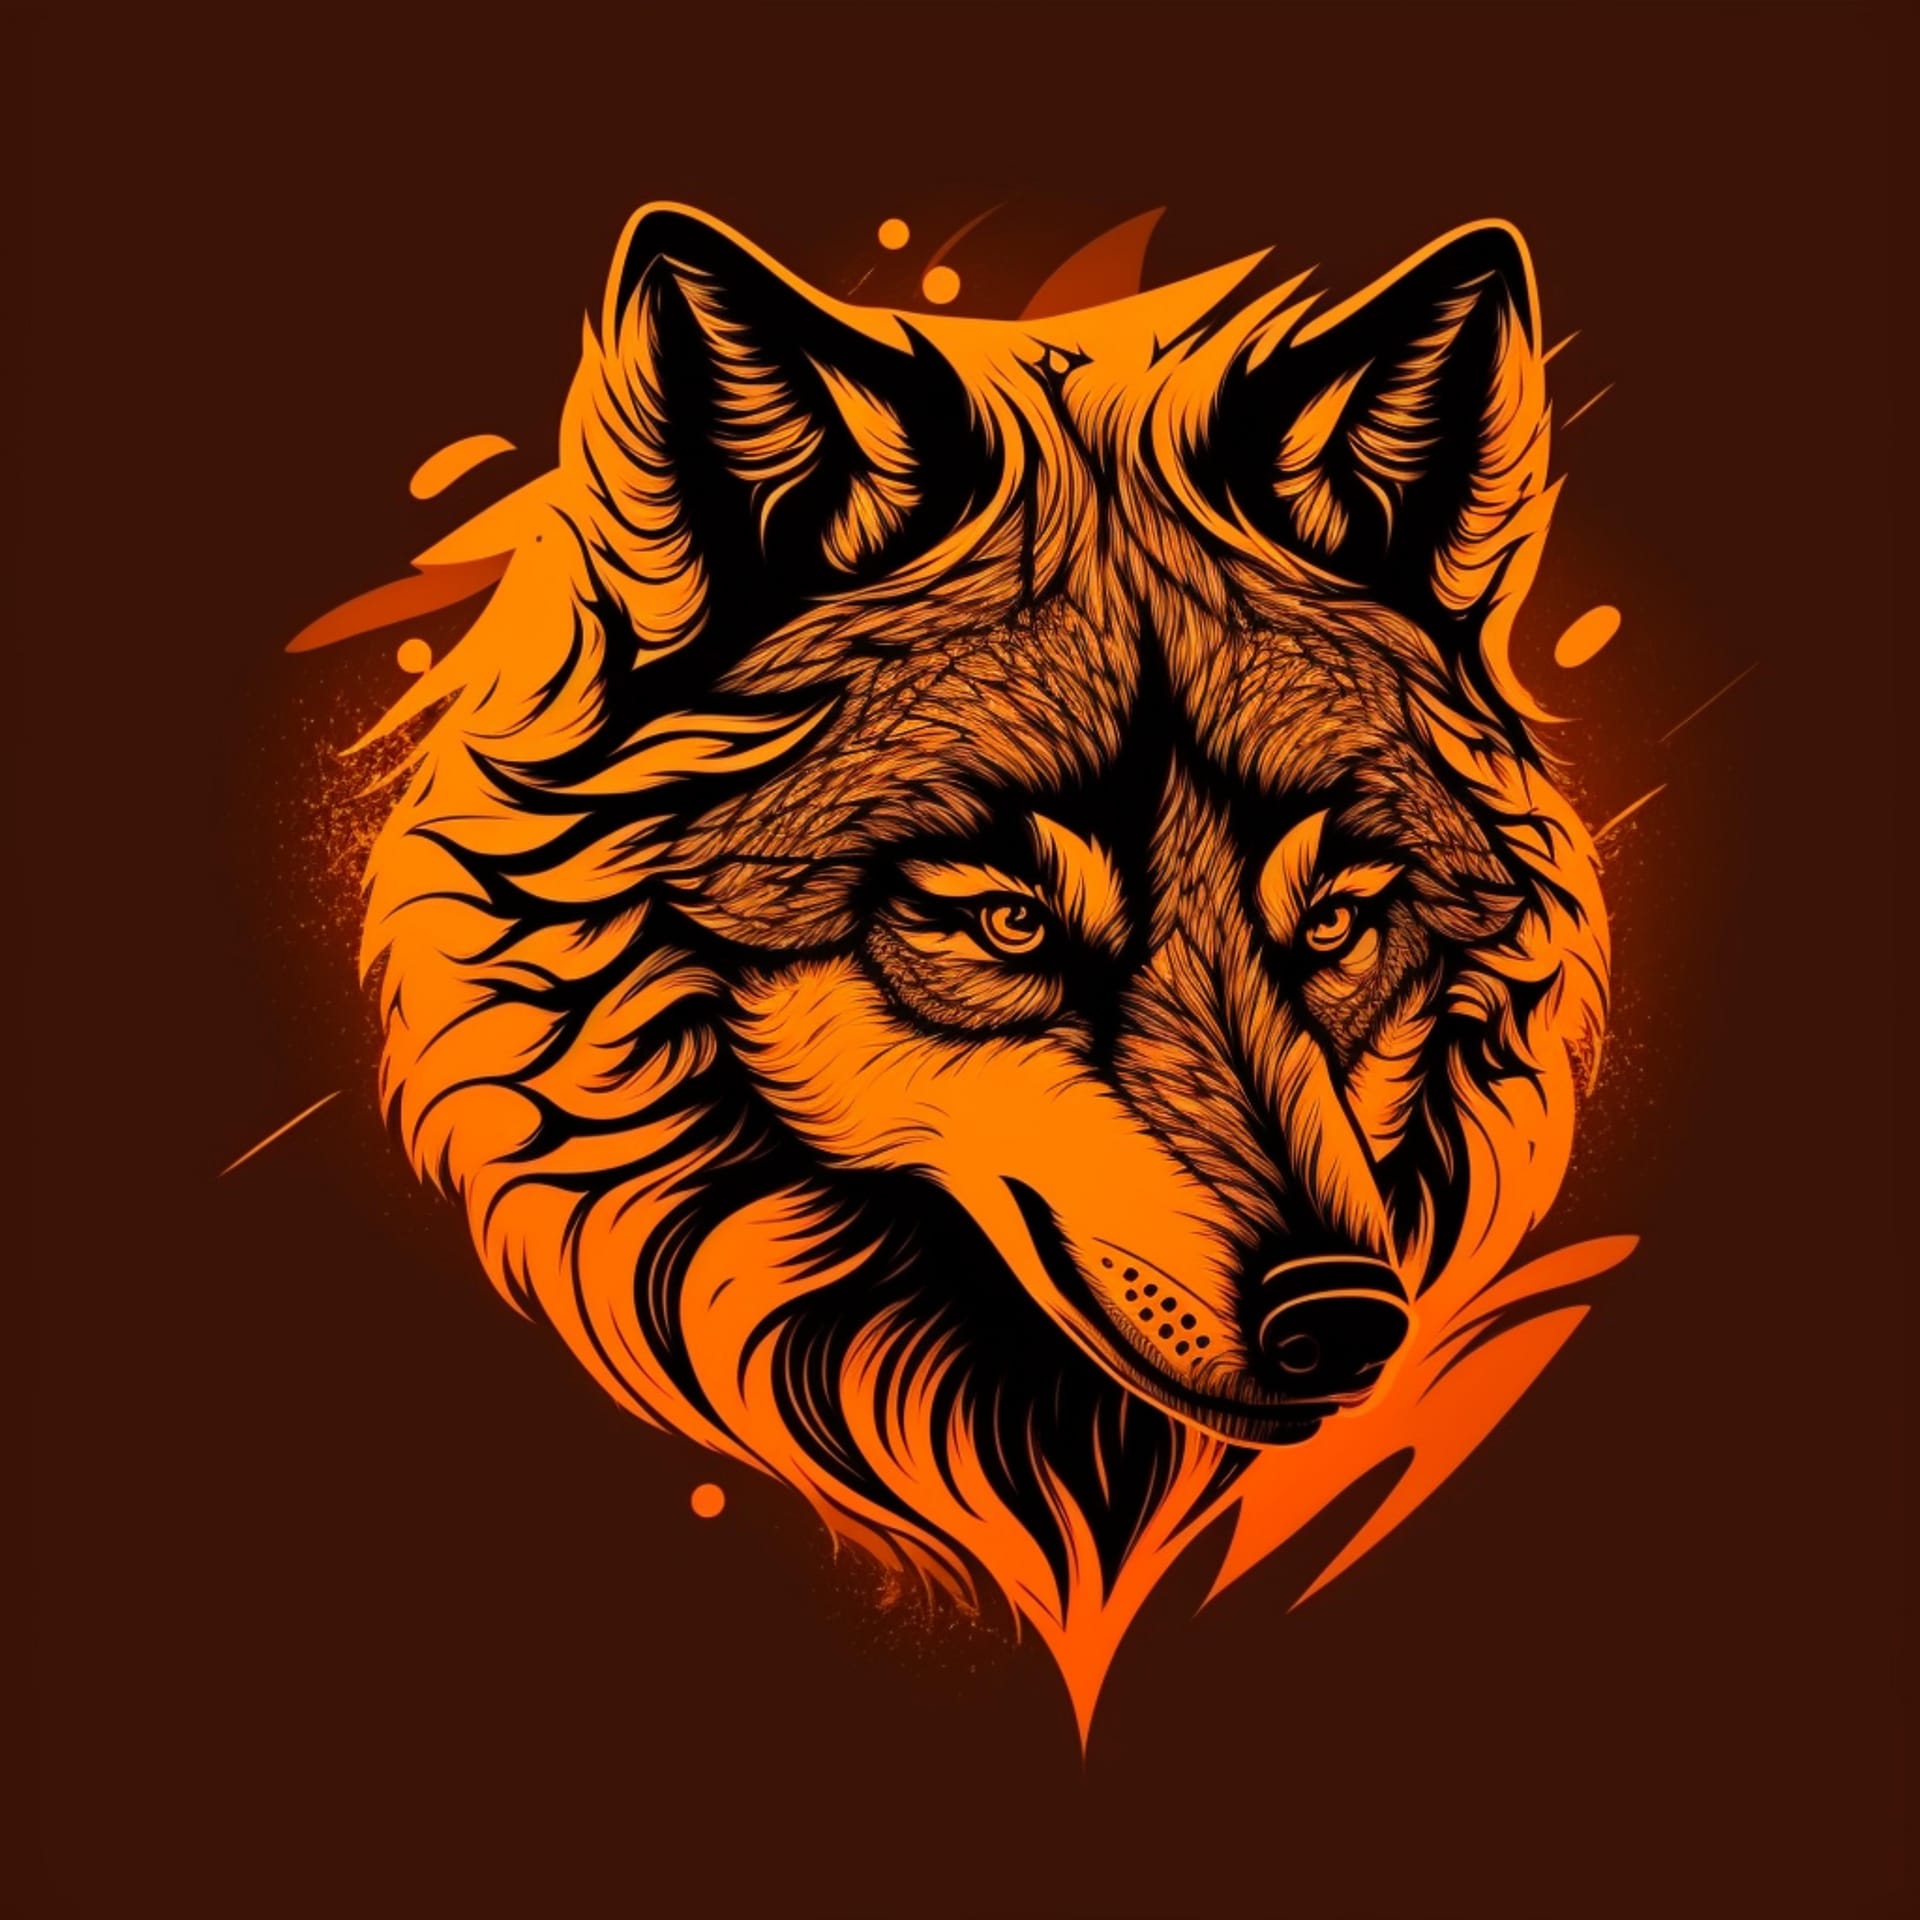 Wolf logo design nice picture wolf profile pic